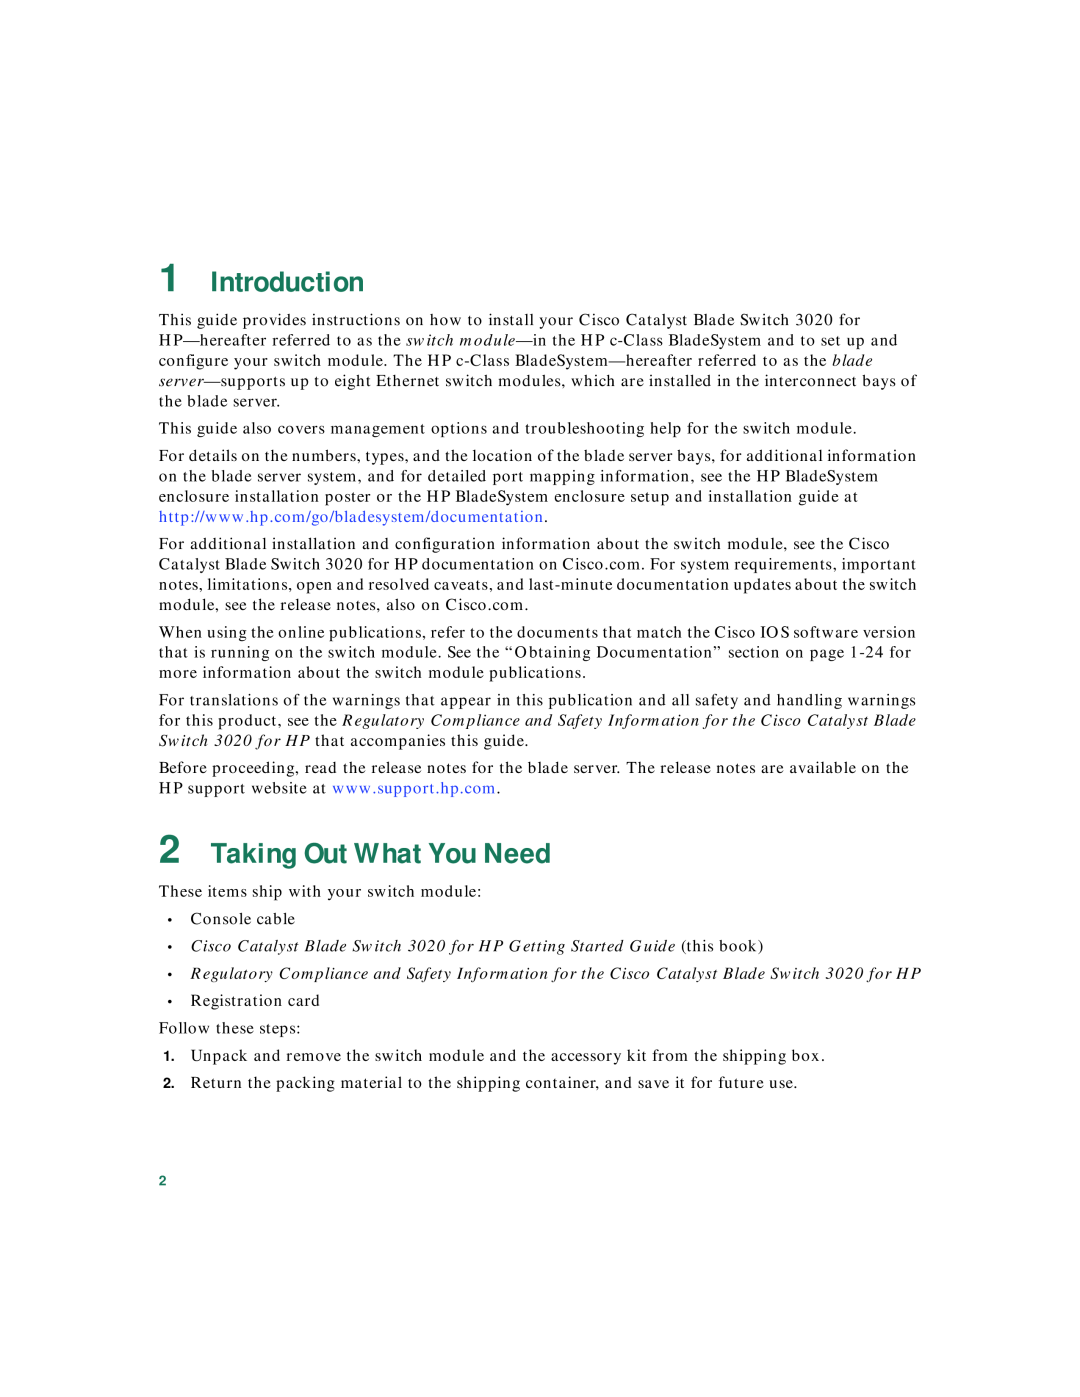 Cisco Systems 3020 warranty Introduction, Taking Out What You Need 